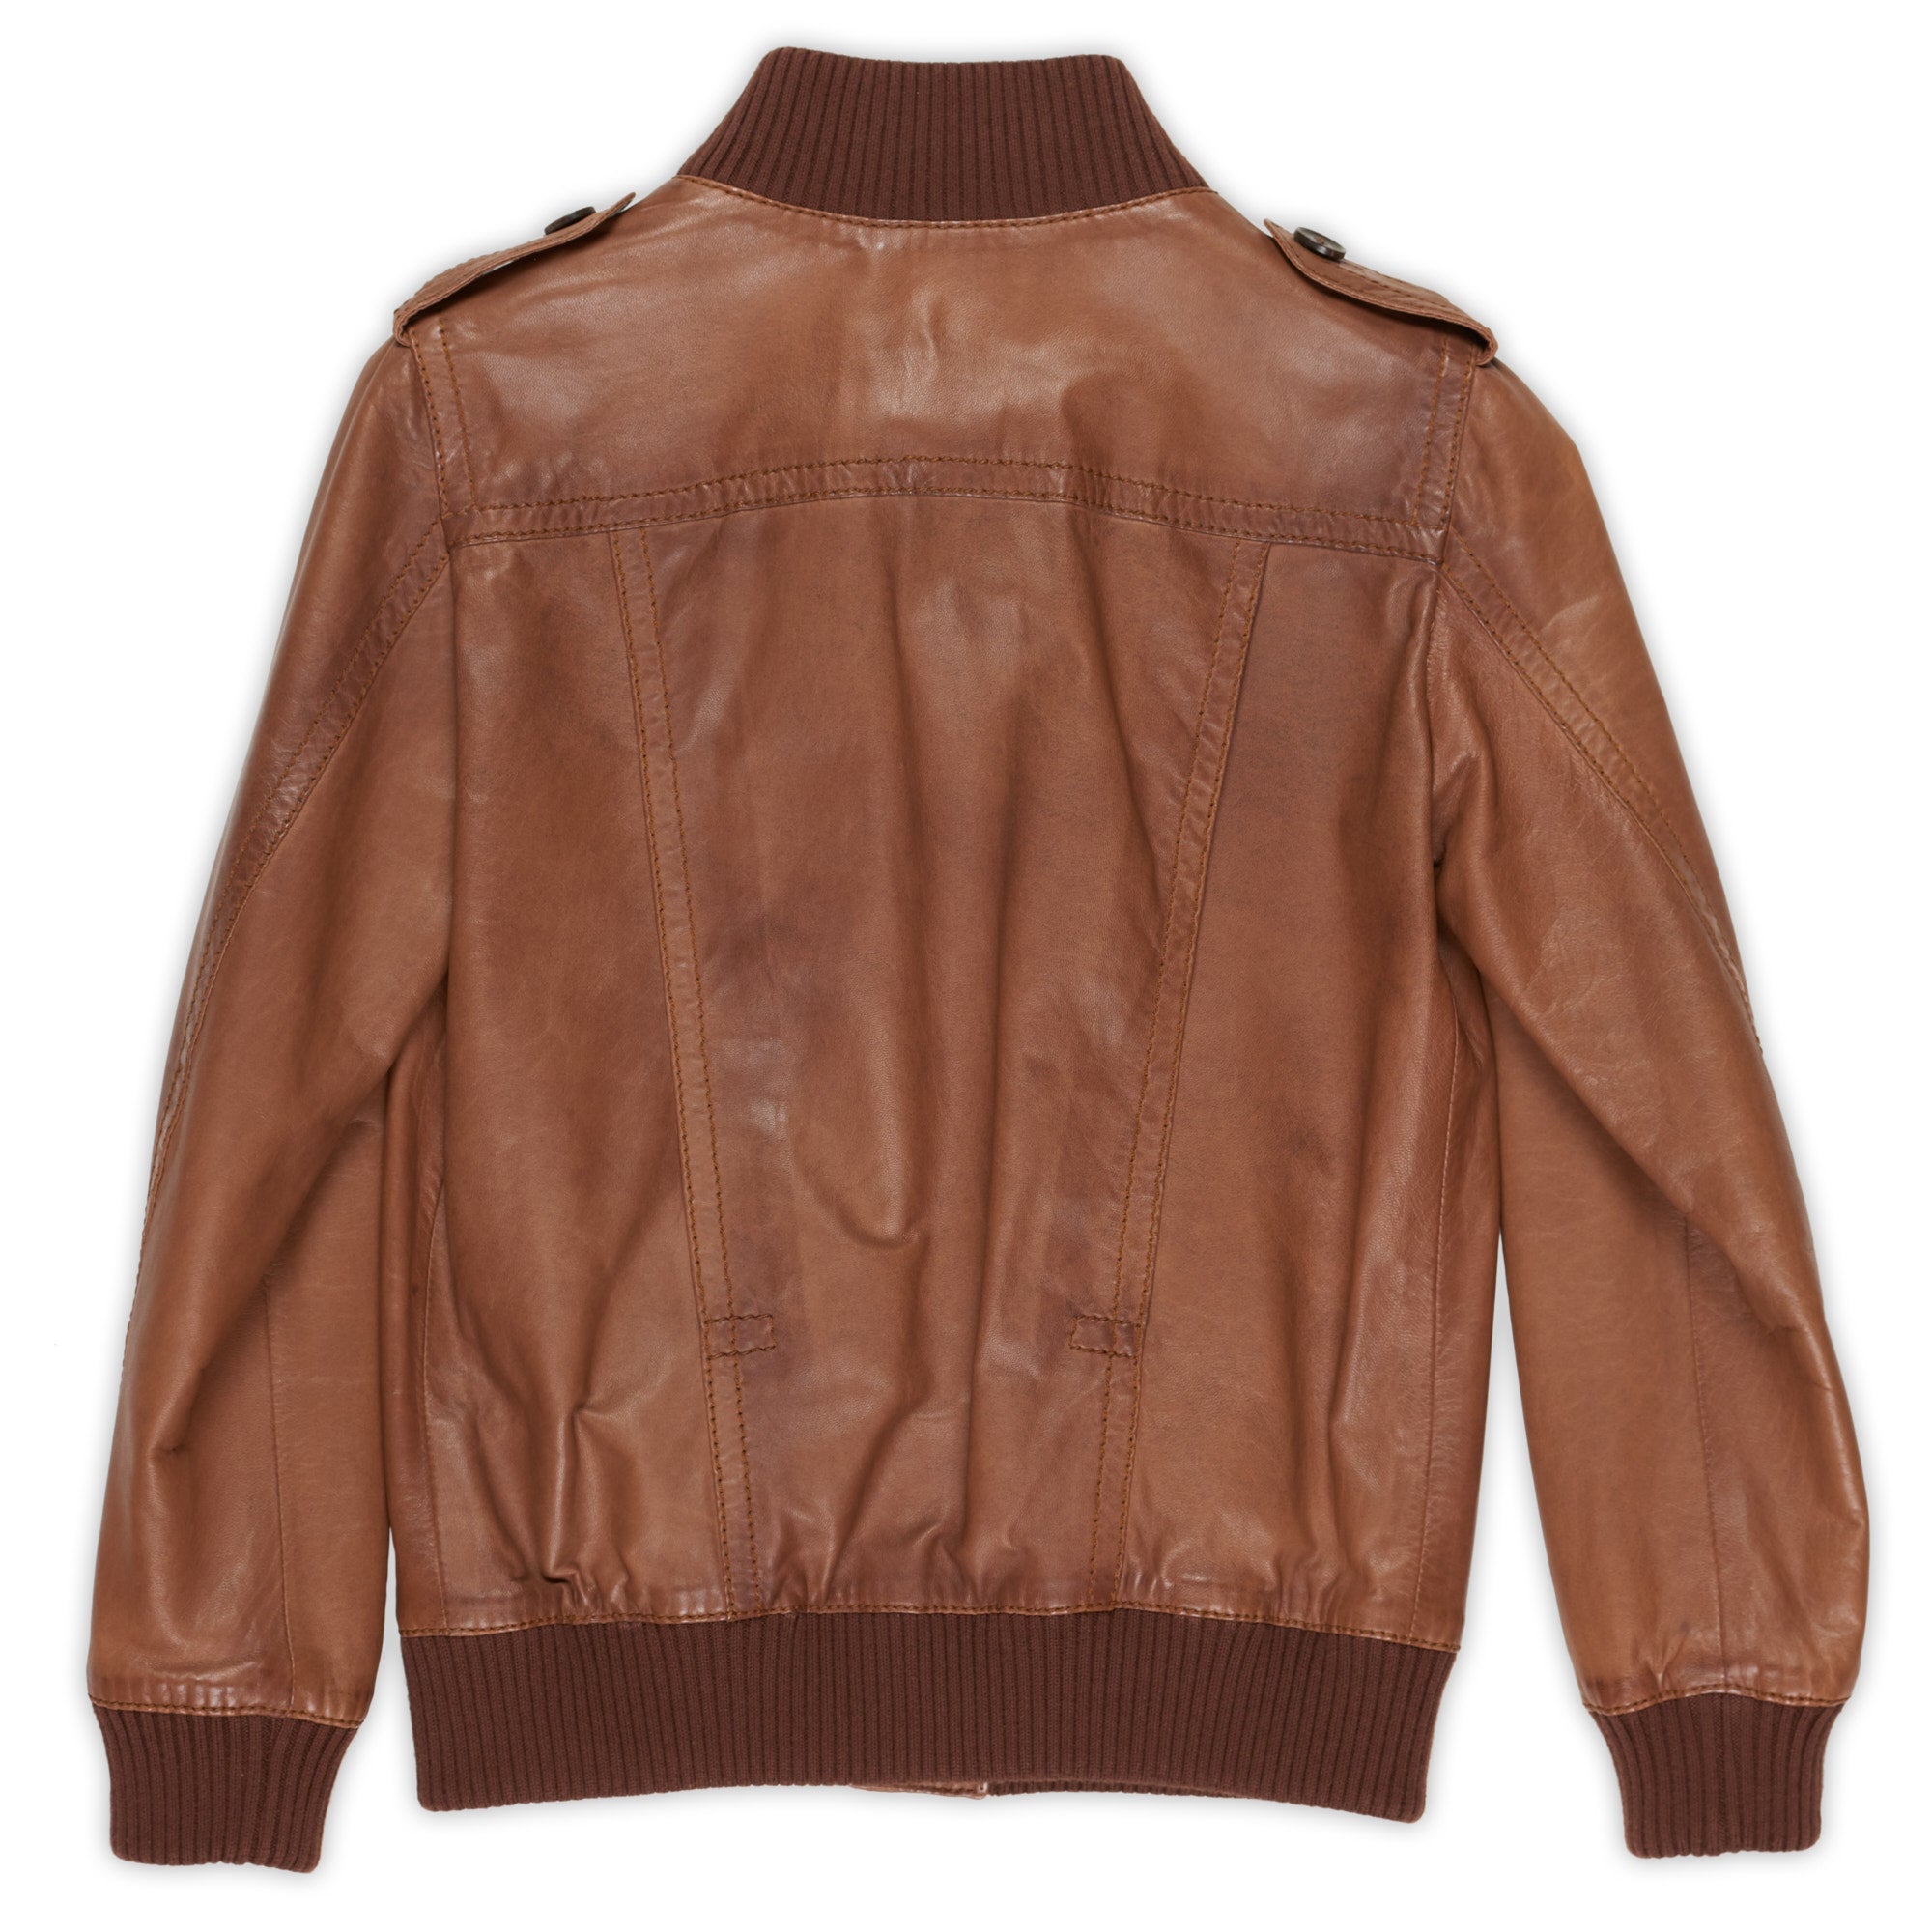 GUCCI Made in Italy Brown Leather Boys Bomber Flight Jacket Size 8 Children GUCCI